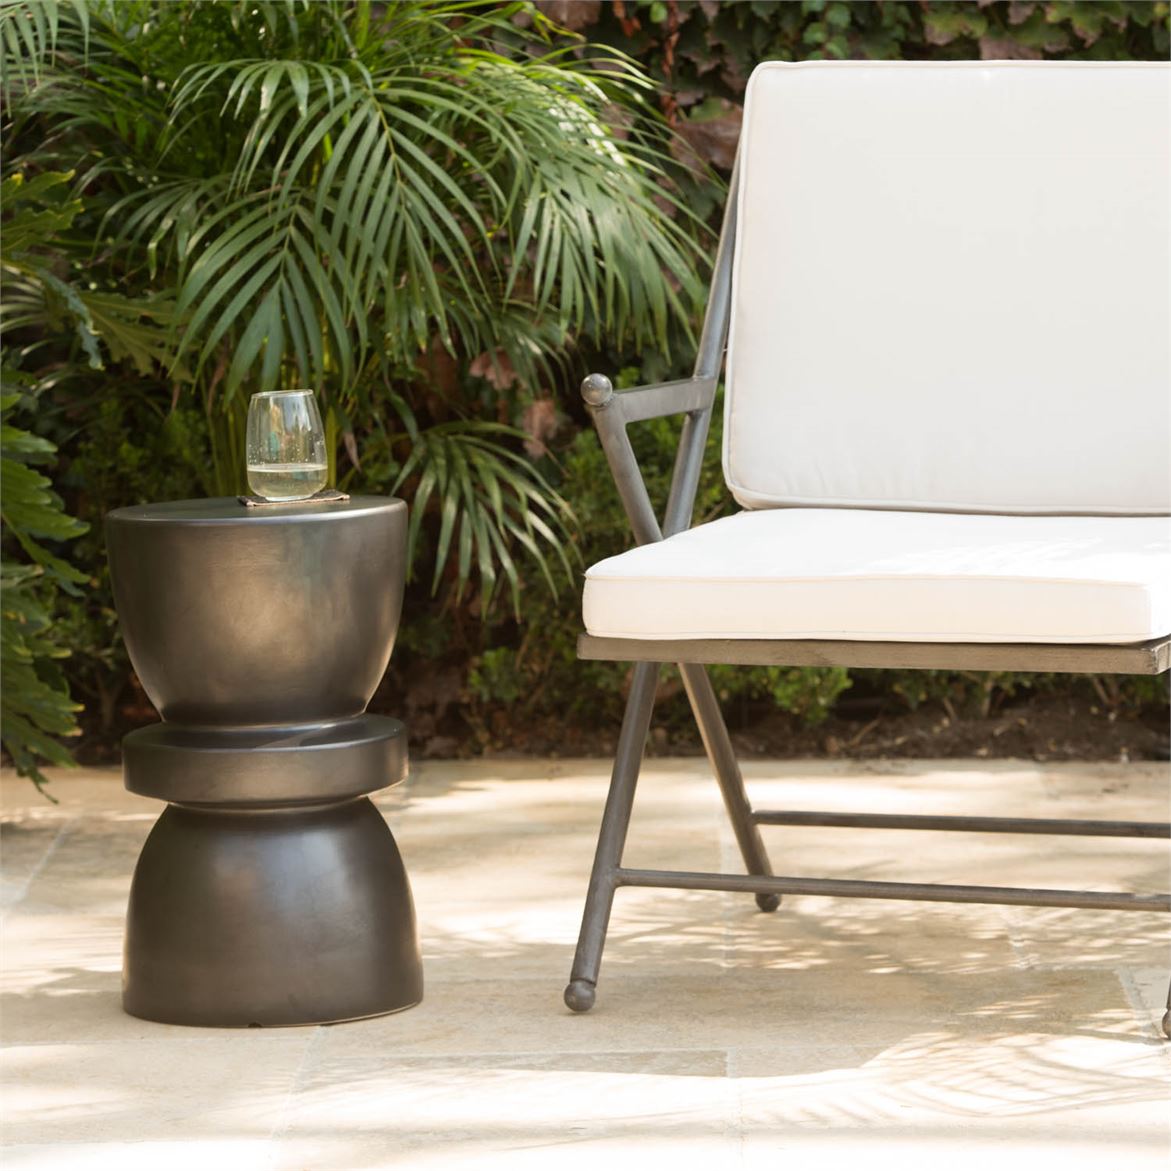 Within the new site of Meadow Blu is an expanded Outdoor collection for customers to shop.